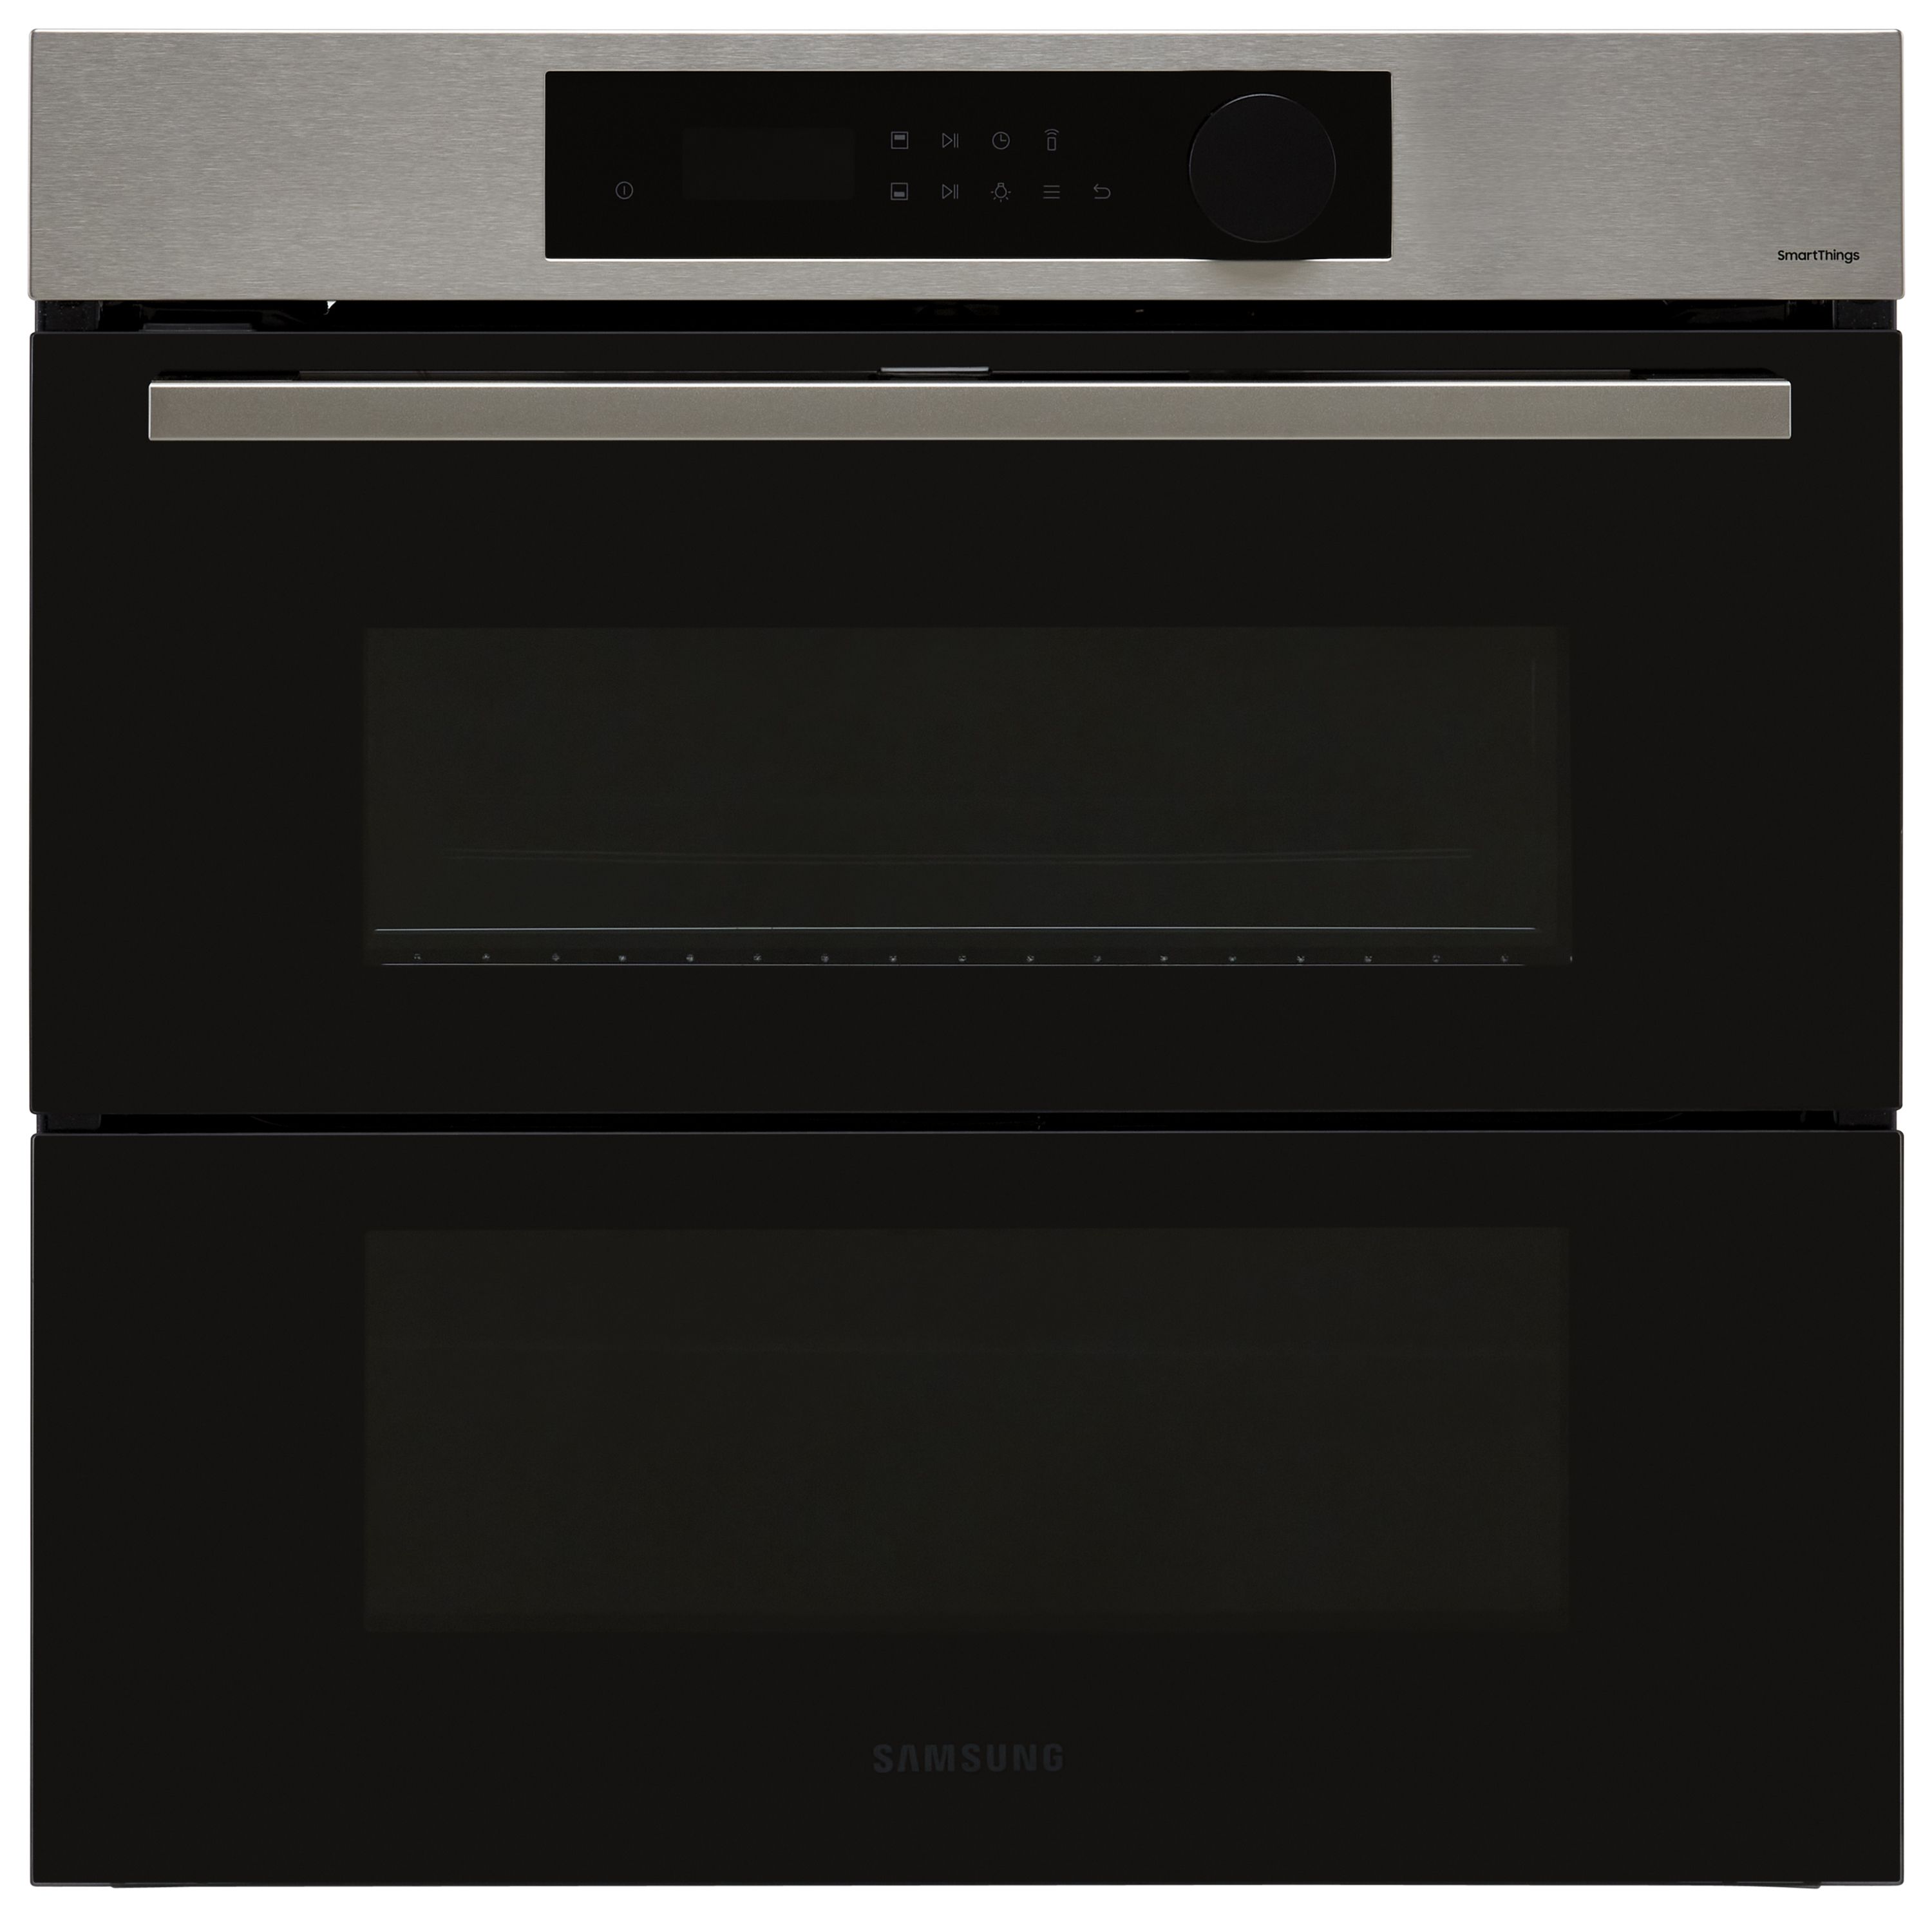 NV7B5775XAK Series 5 Dual Oven Steam Oven